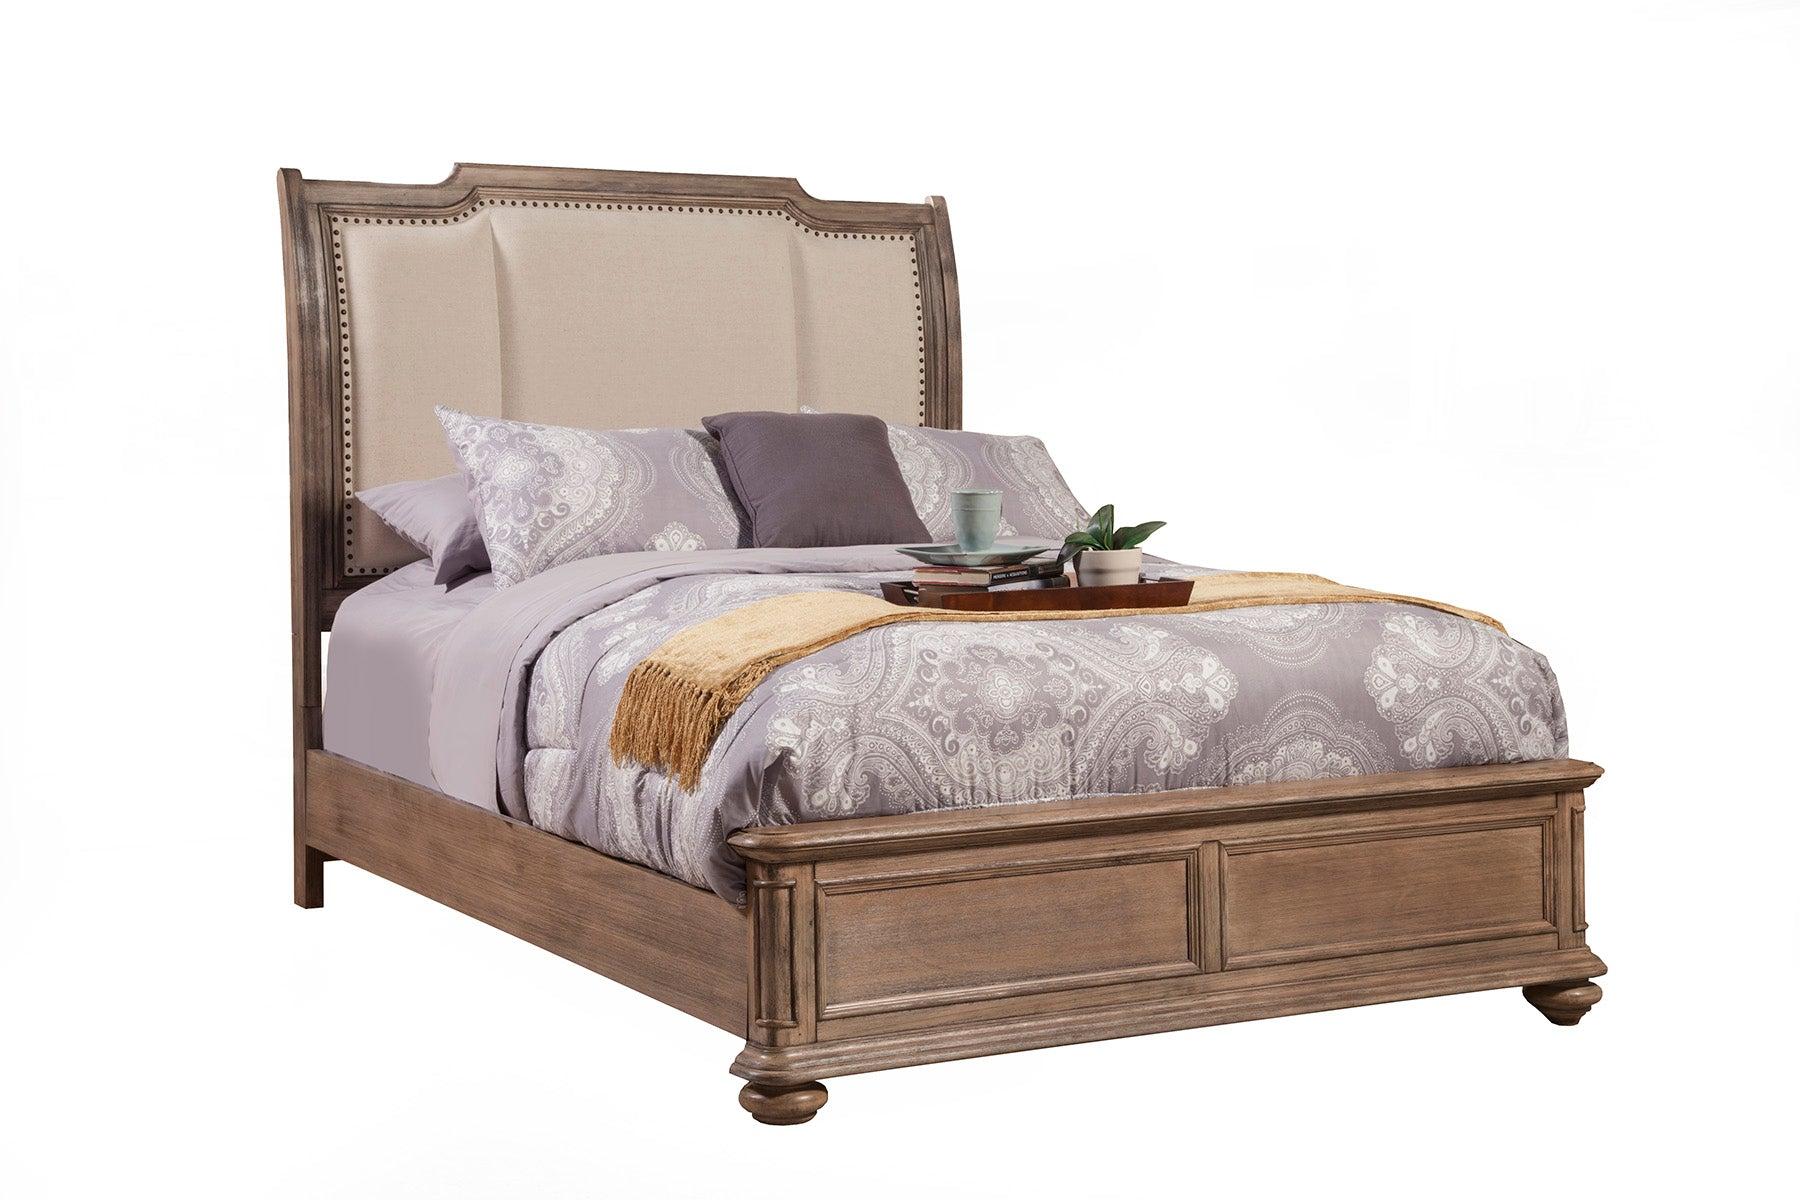 

    
Truffle Queen Upholstered Sleigh Bedroom Set 3 MELBOURNE ALPINE Traditional
